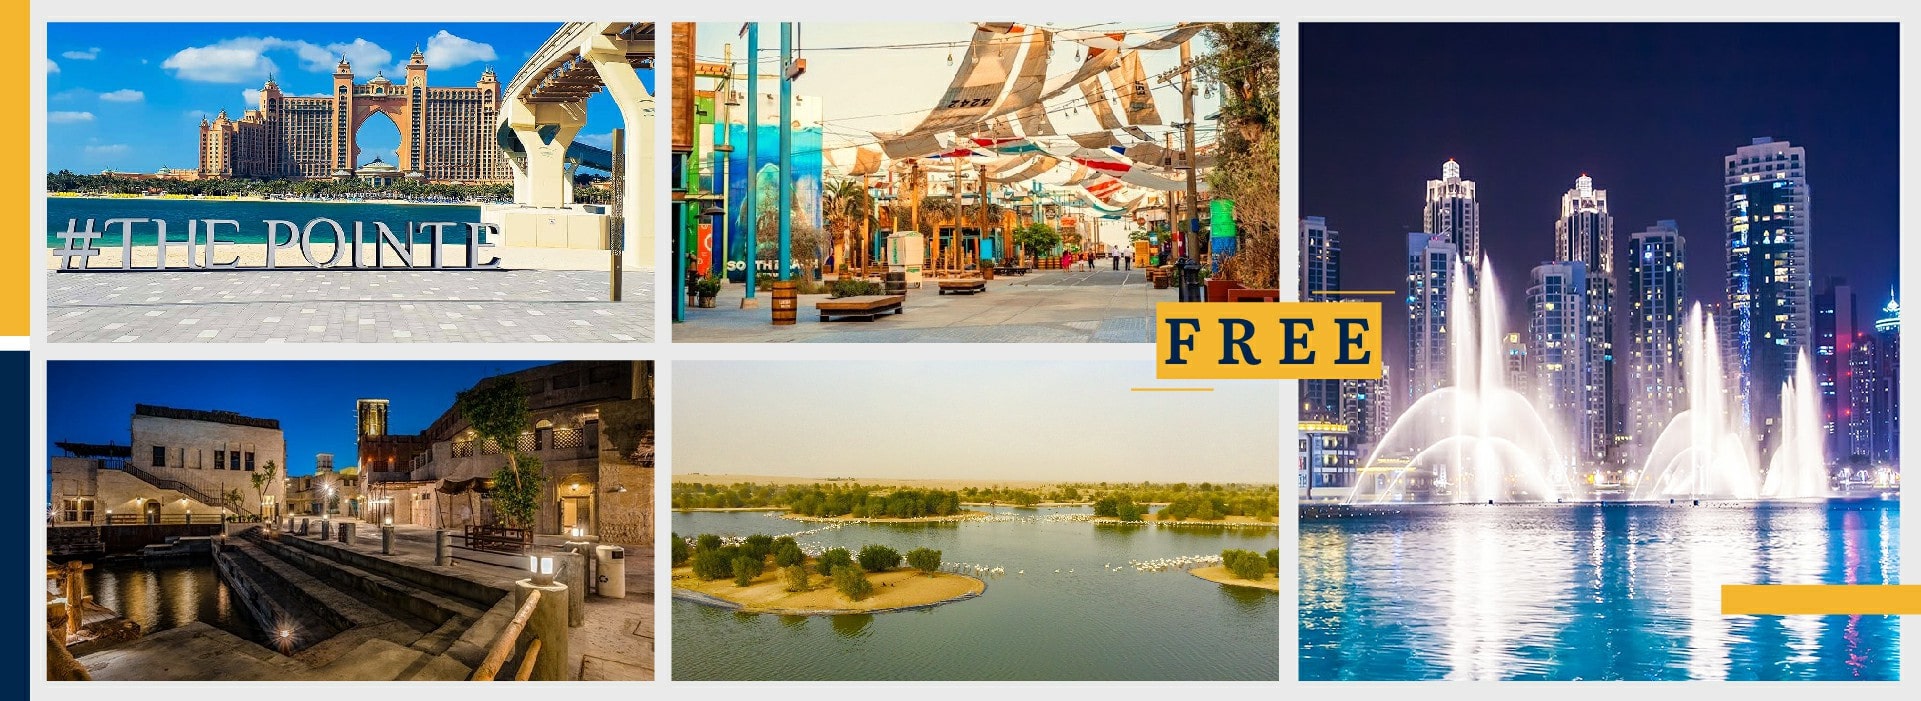 Image of all the tours & attractions in dubai that can be enjoyed for free